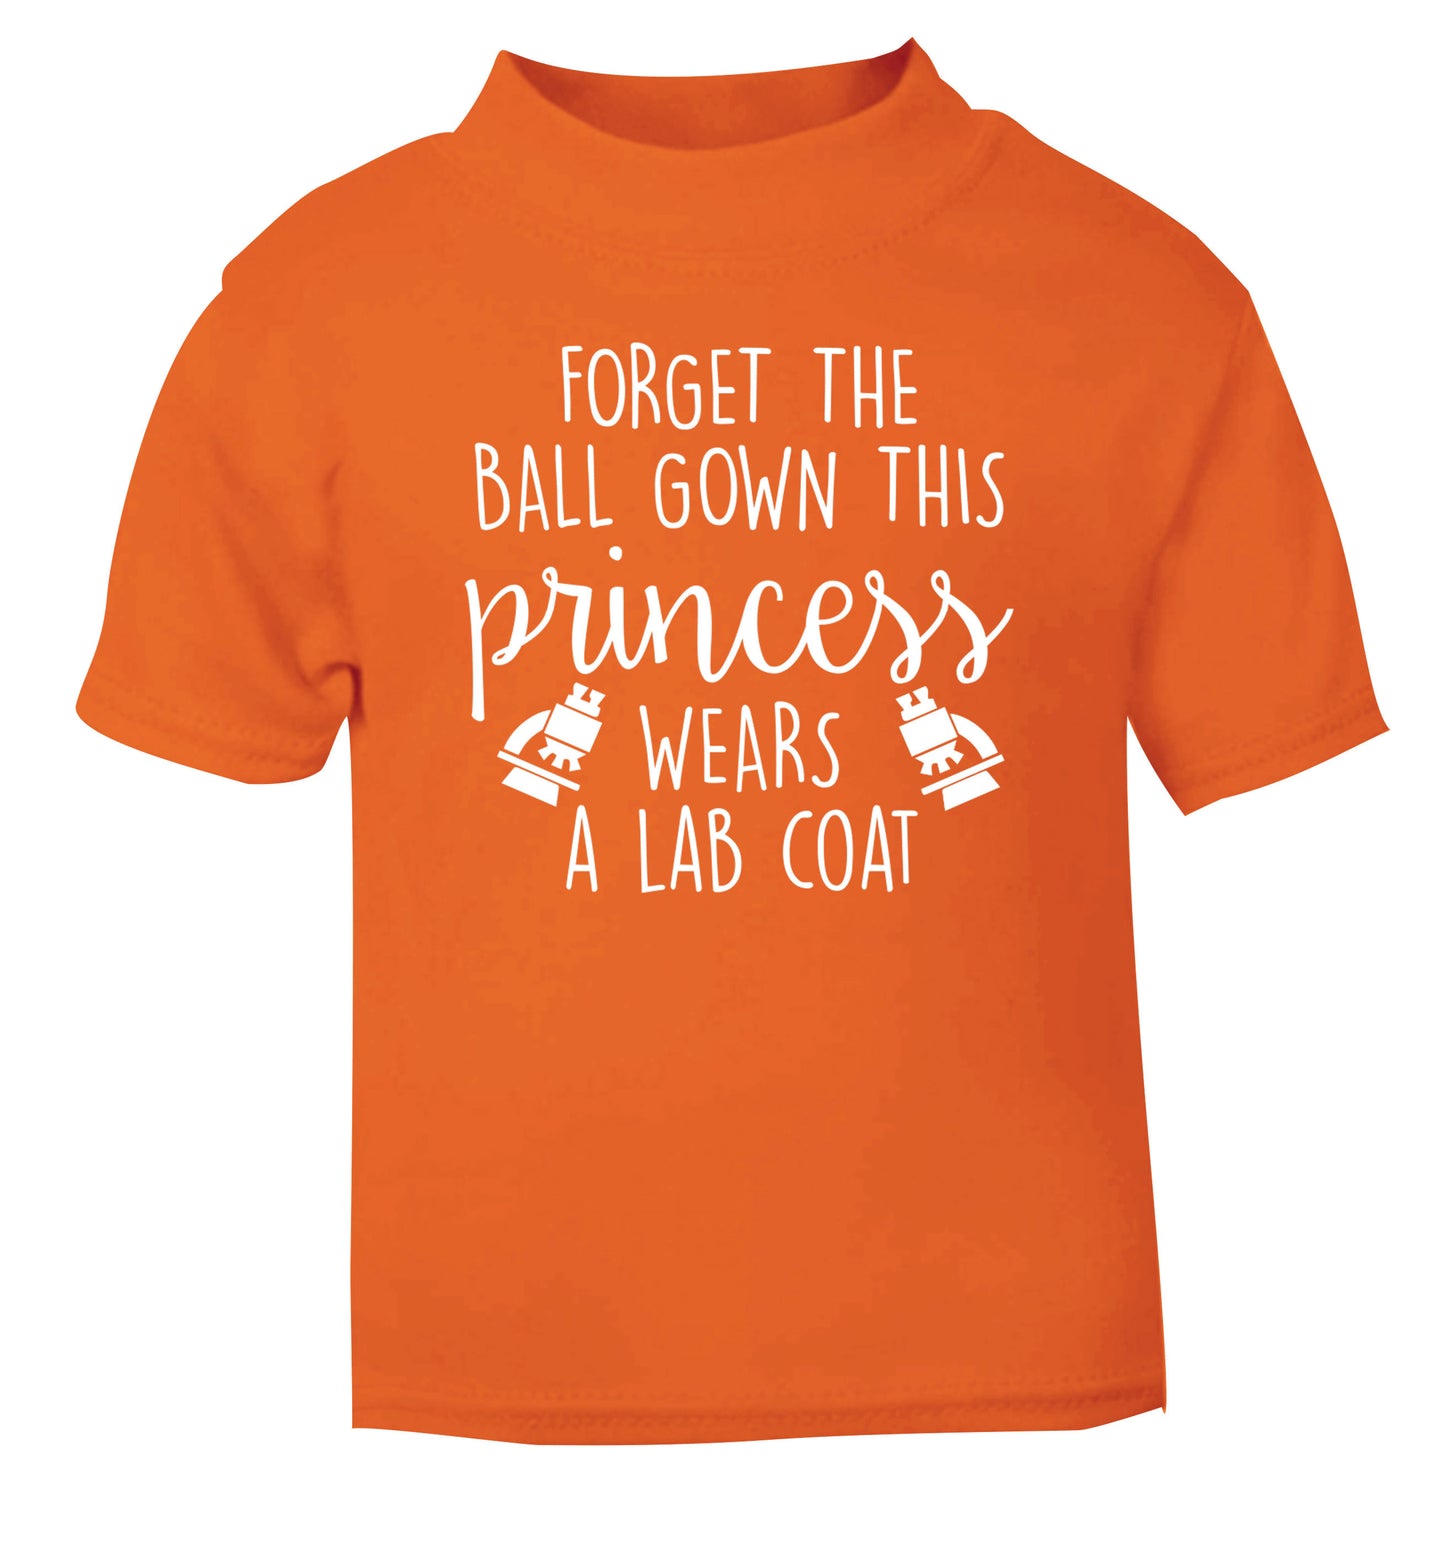 Forget the ball gown this princess wears a lab coat orange Baby Toddler Tshirt 2 Years